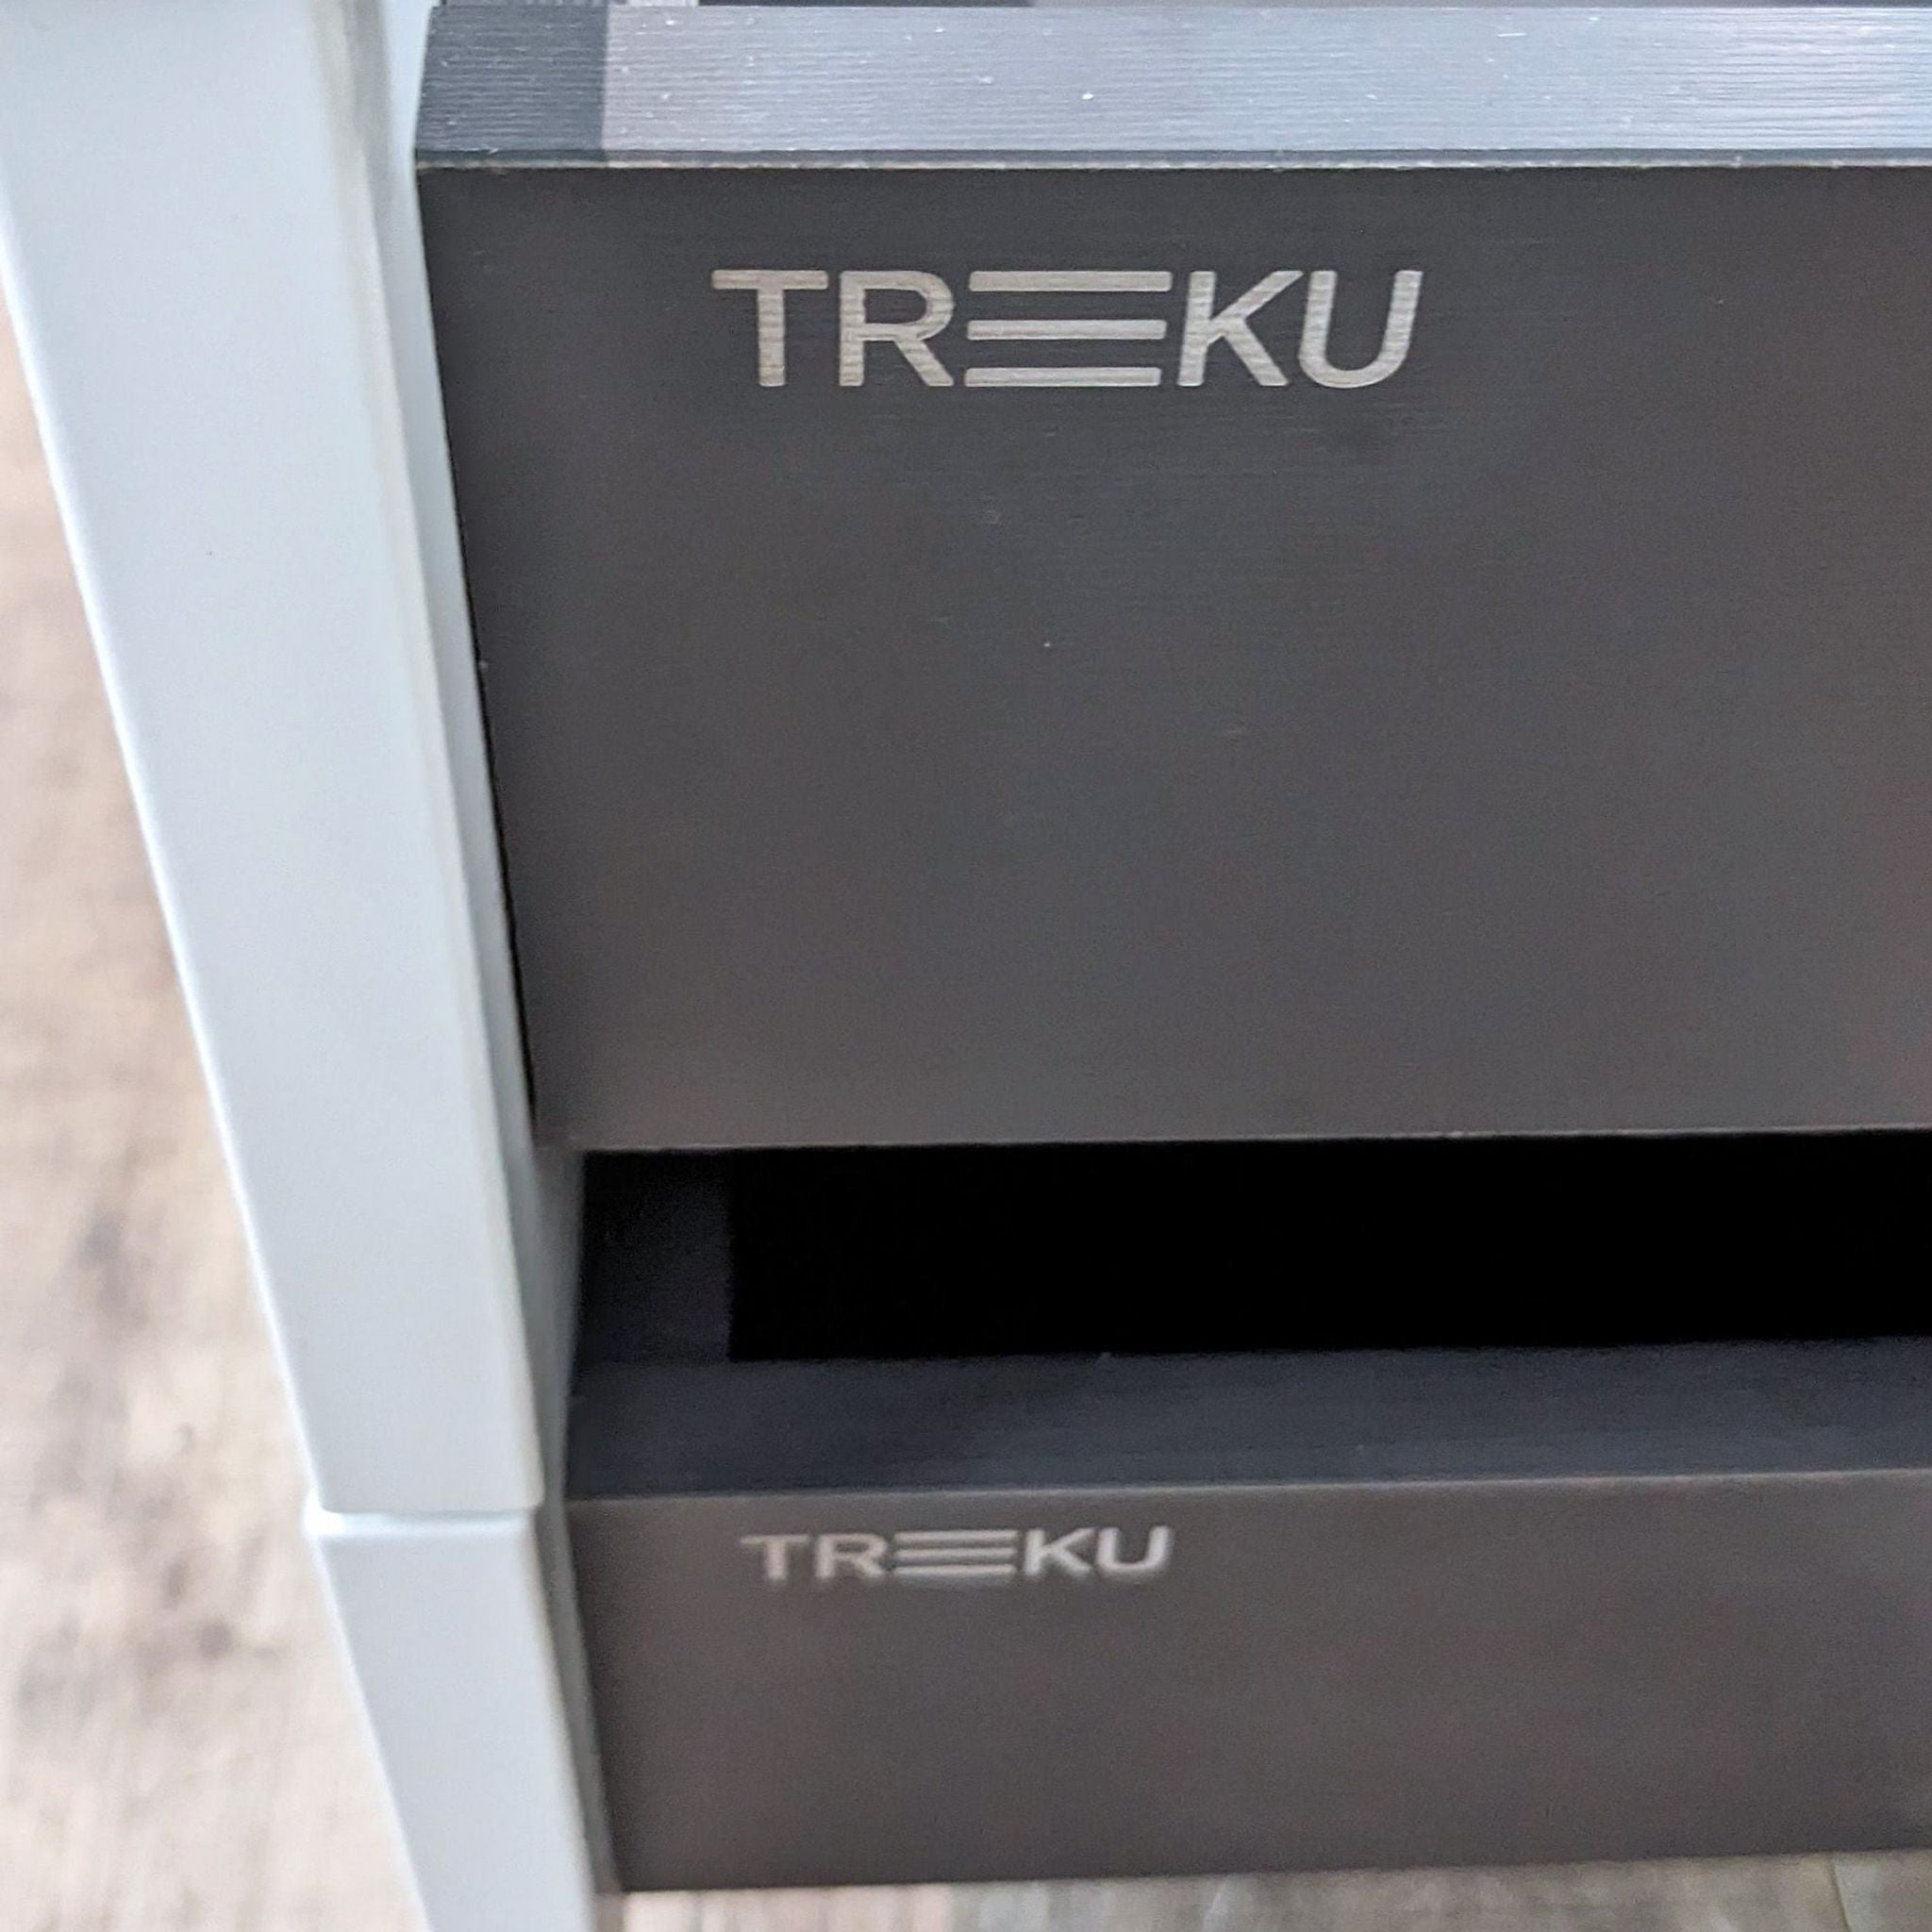 Close-up of Treku brand logo on the two-tone Aura Media Unit by Angel Marti and Enrique Delamo, highlighting the contrast between lacquer and wood veneer.